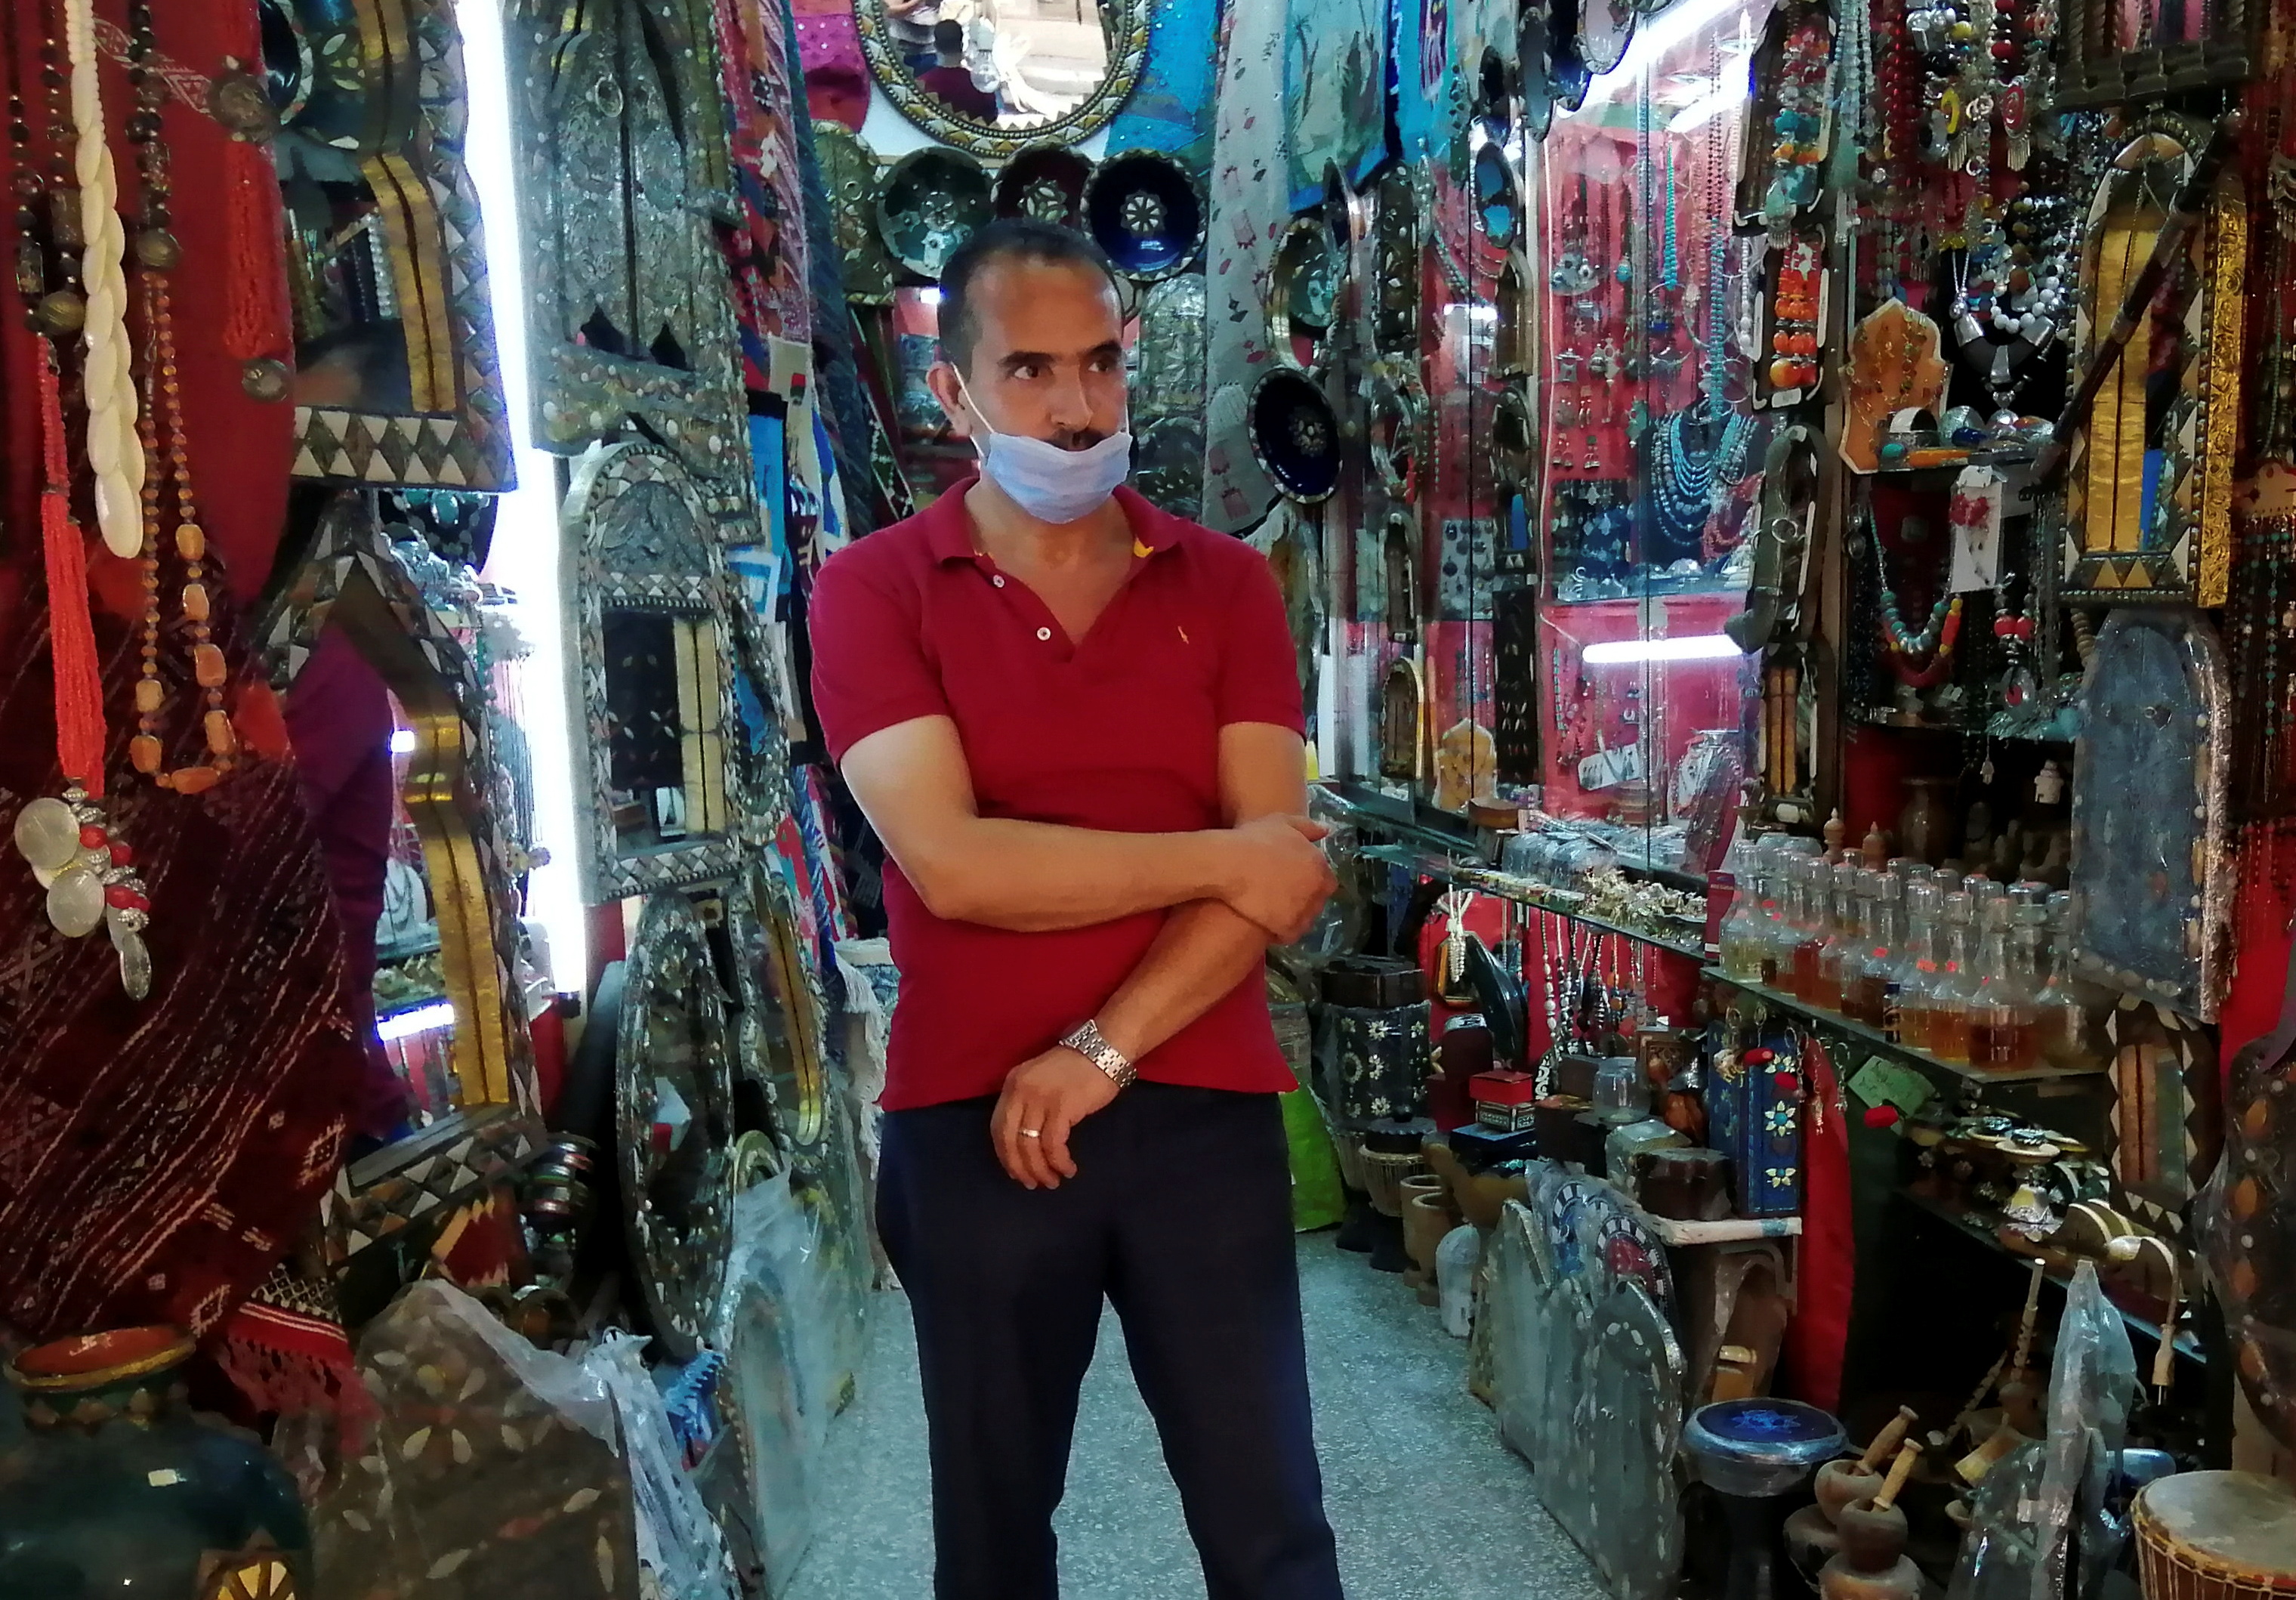 Abdesattar Massoudi, the owner of an artisanal store, attends an interview with Reuters inside his shop in the tourist bazaar in the Old City of Tunis